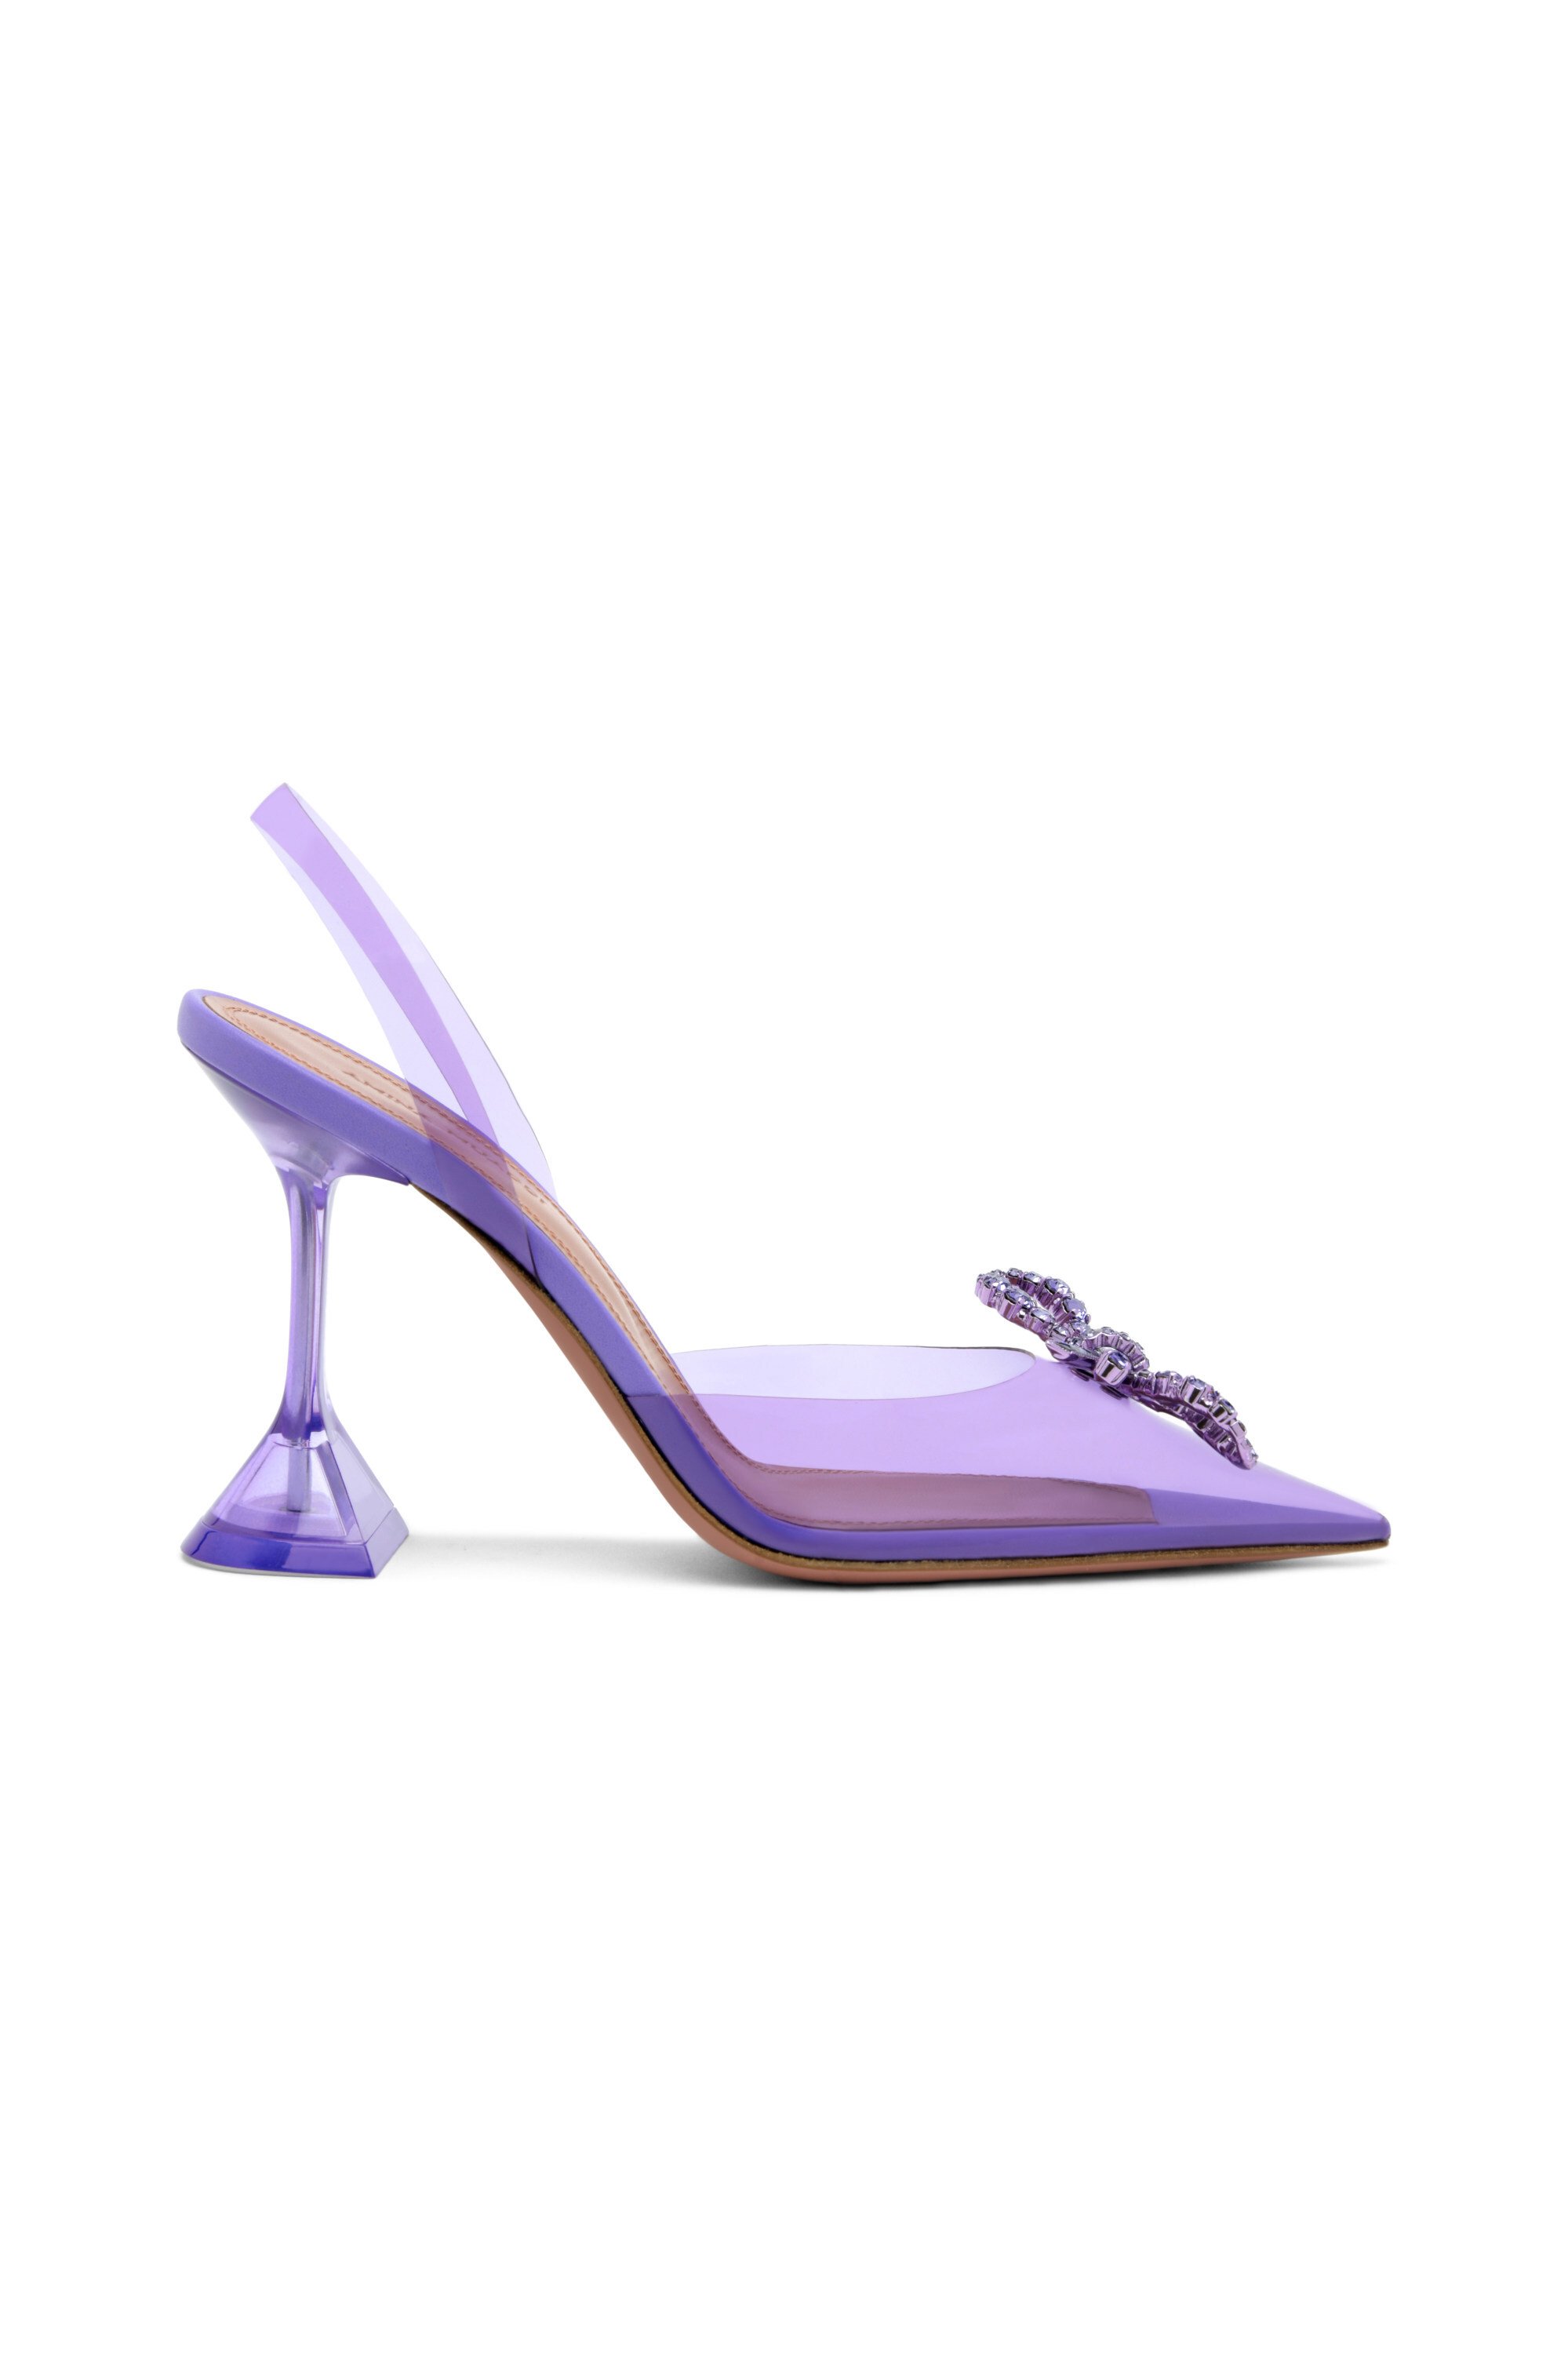 5 stylish slingback shoes to wear this spring, from Prada and Alexander ...